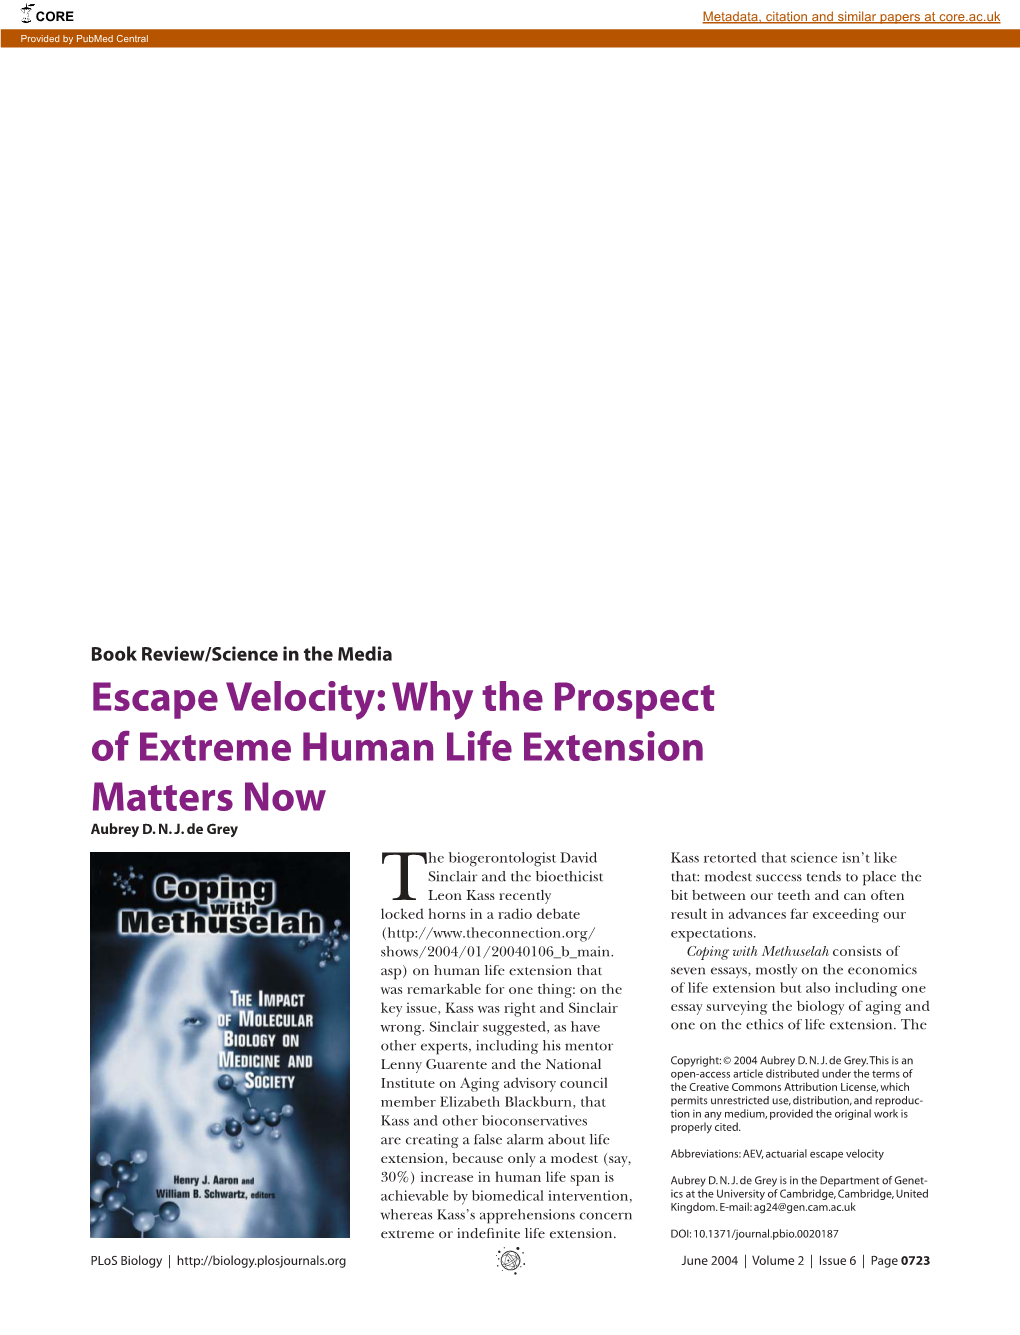 Escape Velocity: Why the Prospect of Extreme Human Life Extension Matters Now Aubrey D